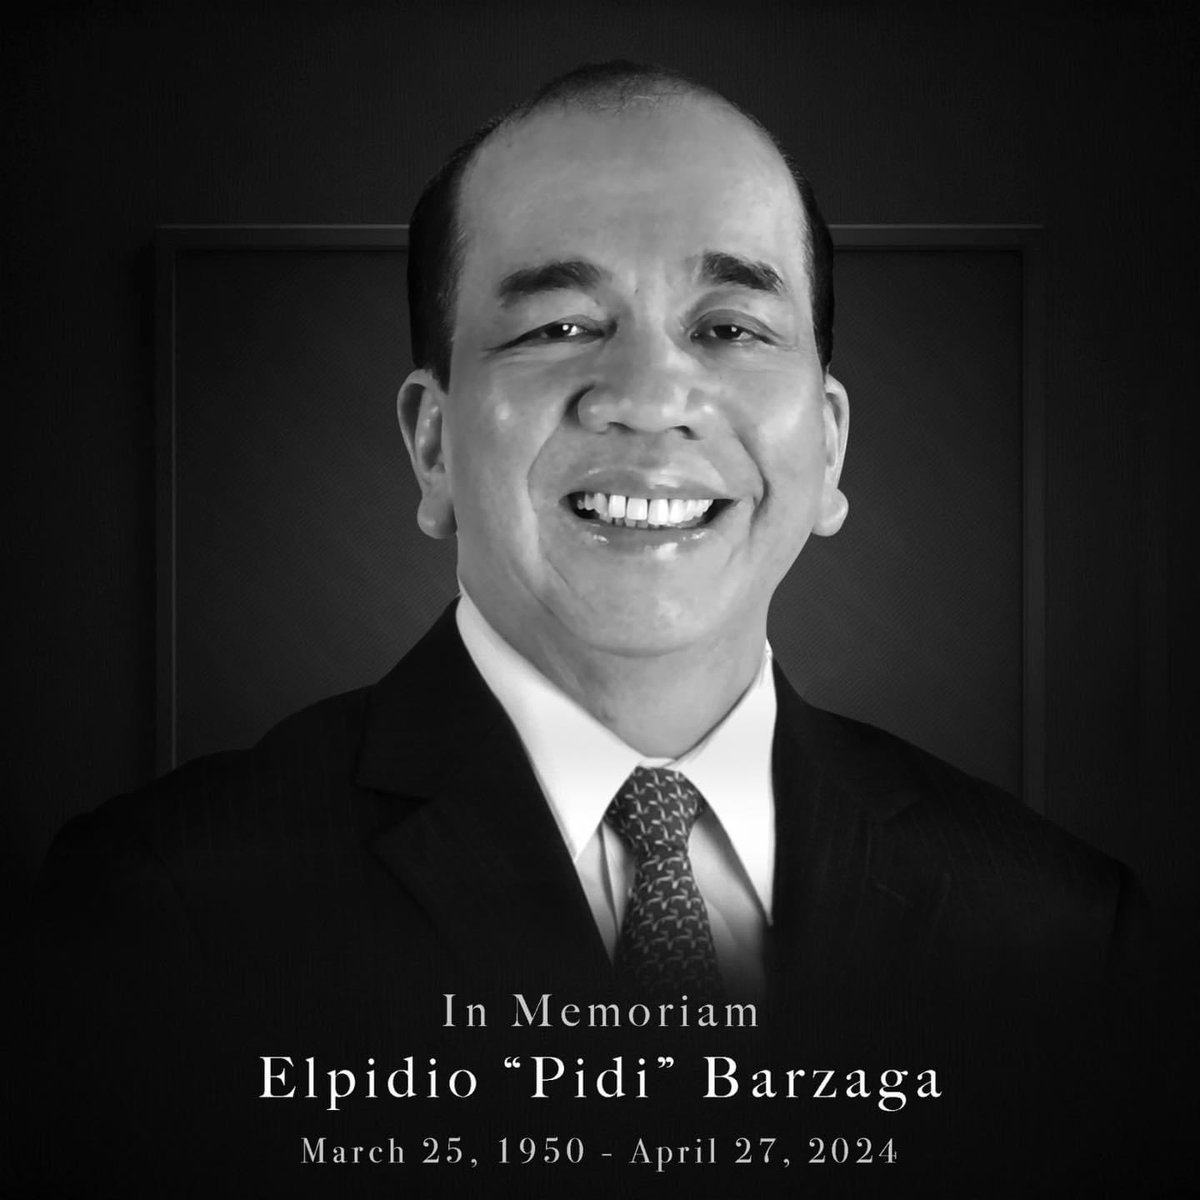 Cavite 4th District Rep Elpidio 'Pidi' Barzaga Jr., died Saturday afternoon at the age of 74 in California, USA, his family said. @News5PH @onenewsph